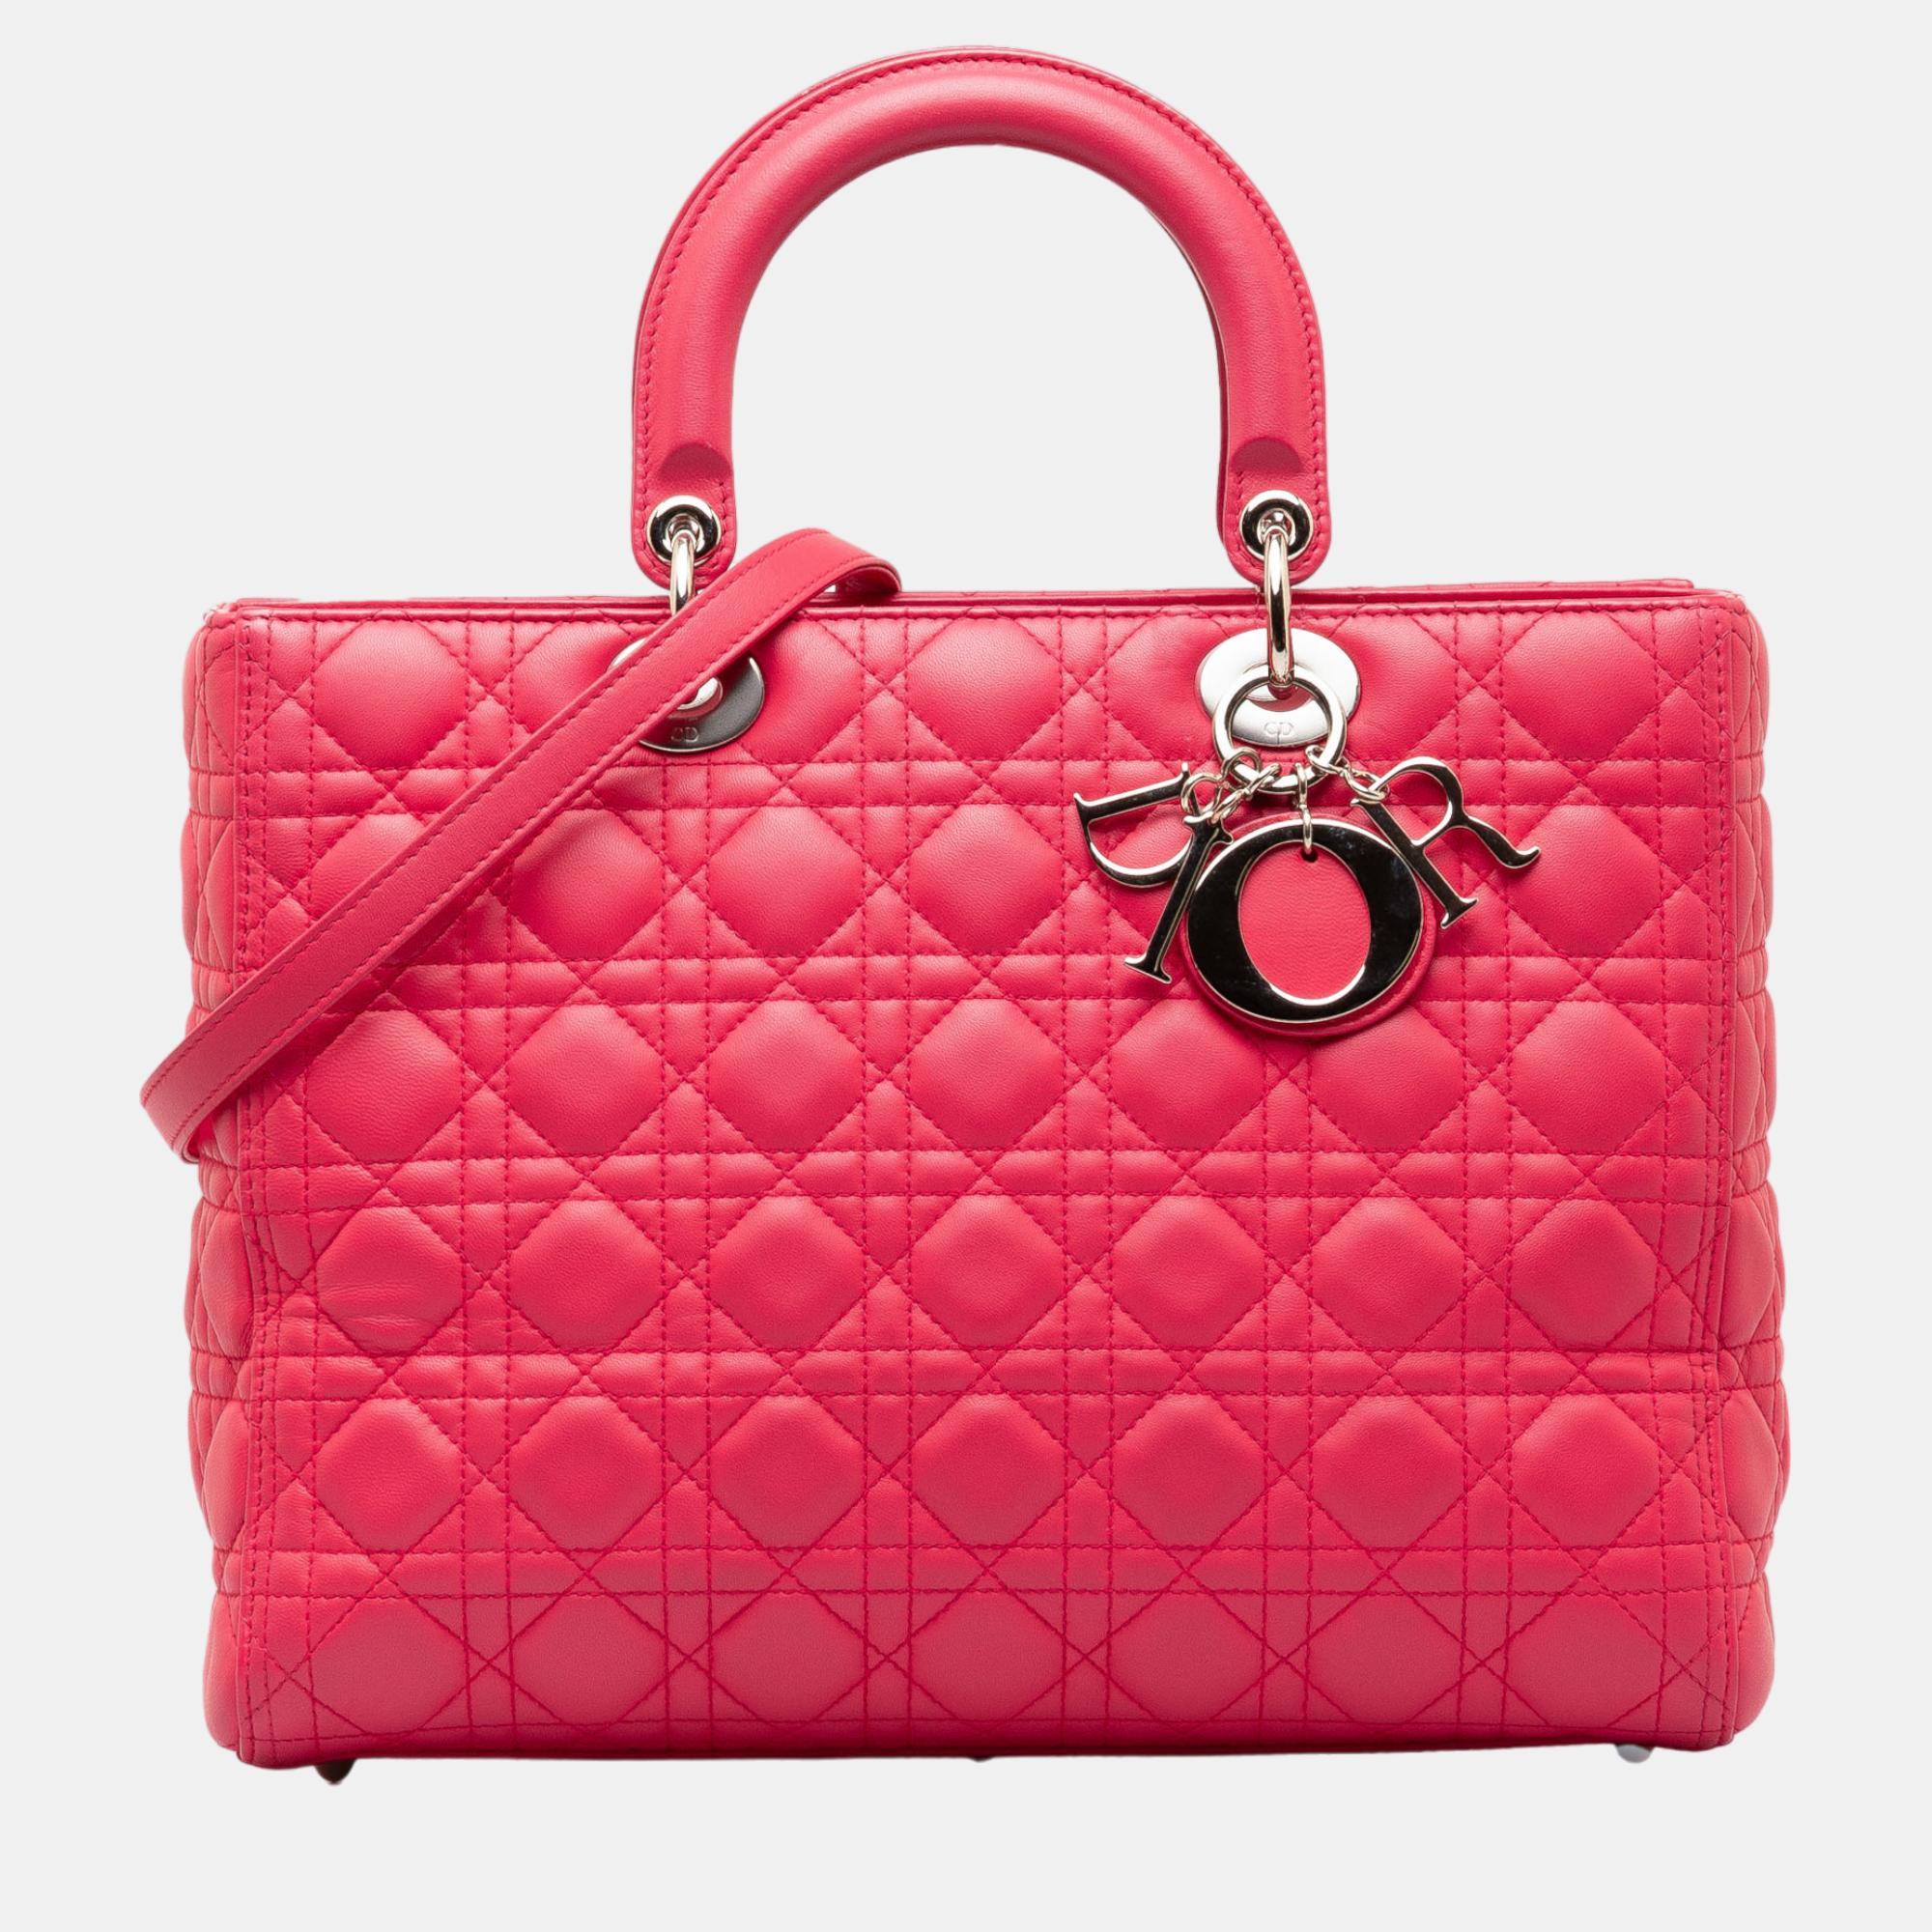 Dior pink large lambskin cannage lady dior